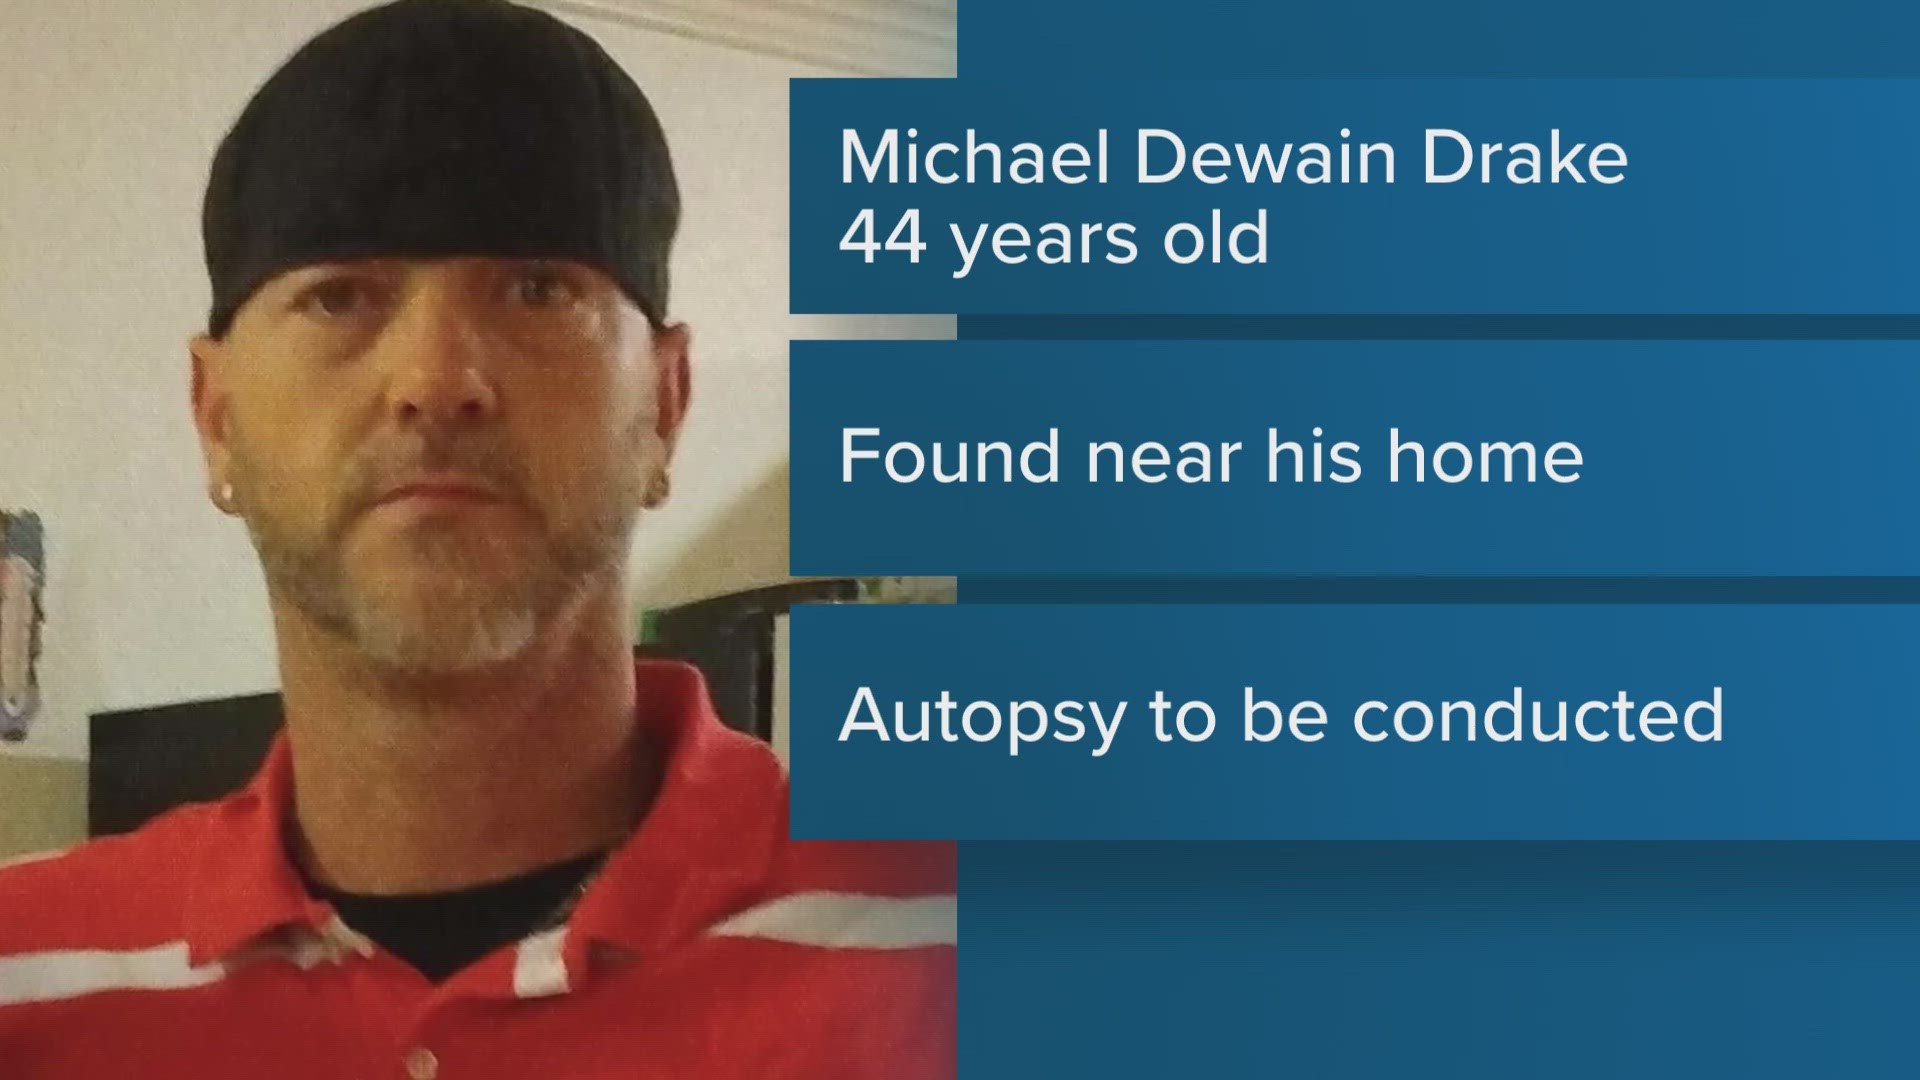 The Bell County Sheriff's Department shared that they were searching for 44-year-old Michael Dewain Drake on Jan. 15, 2024.